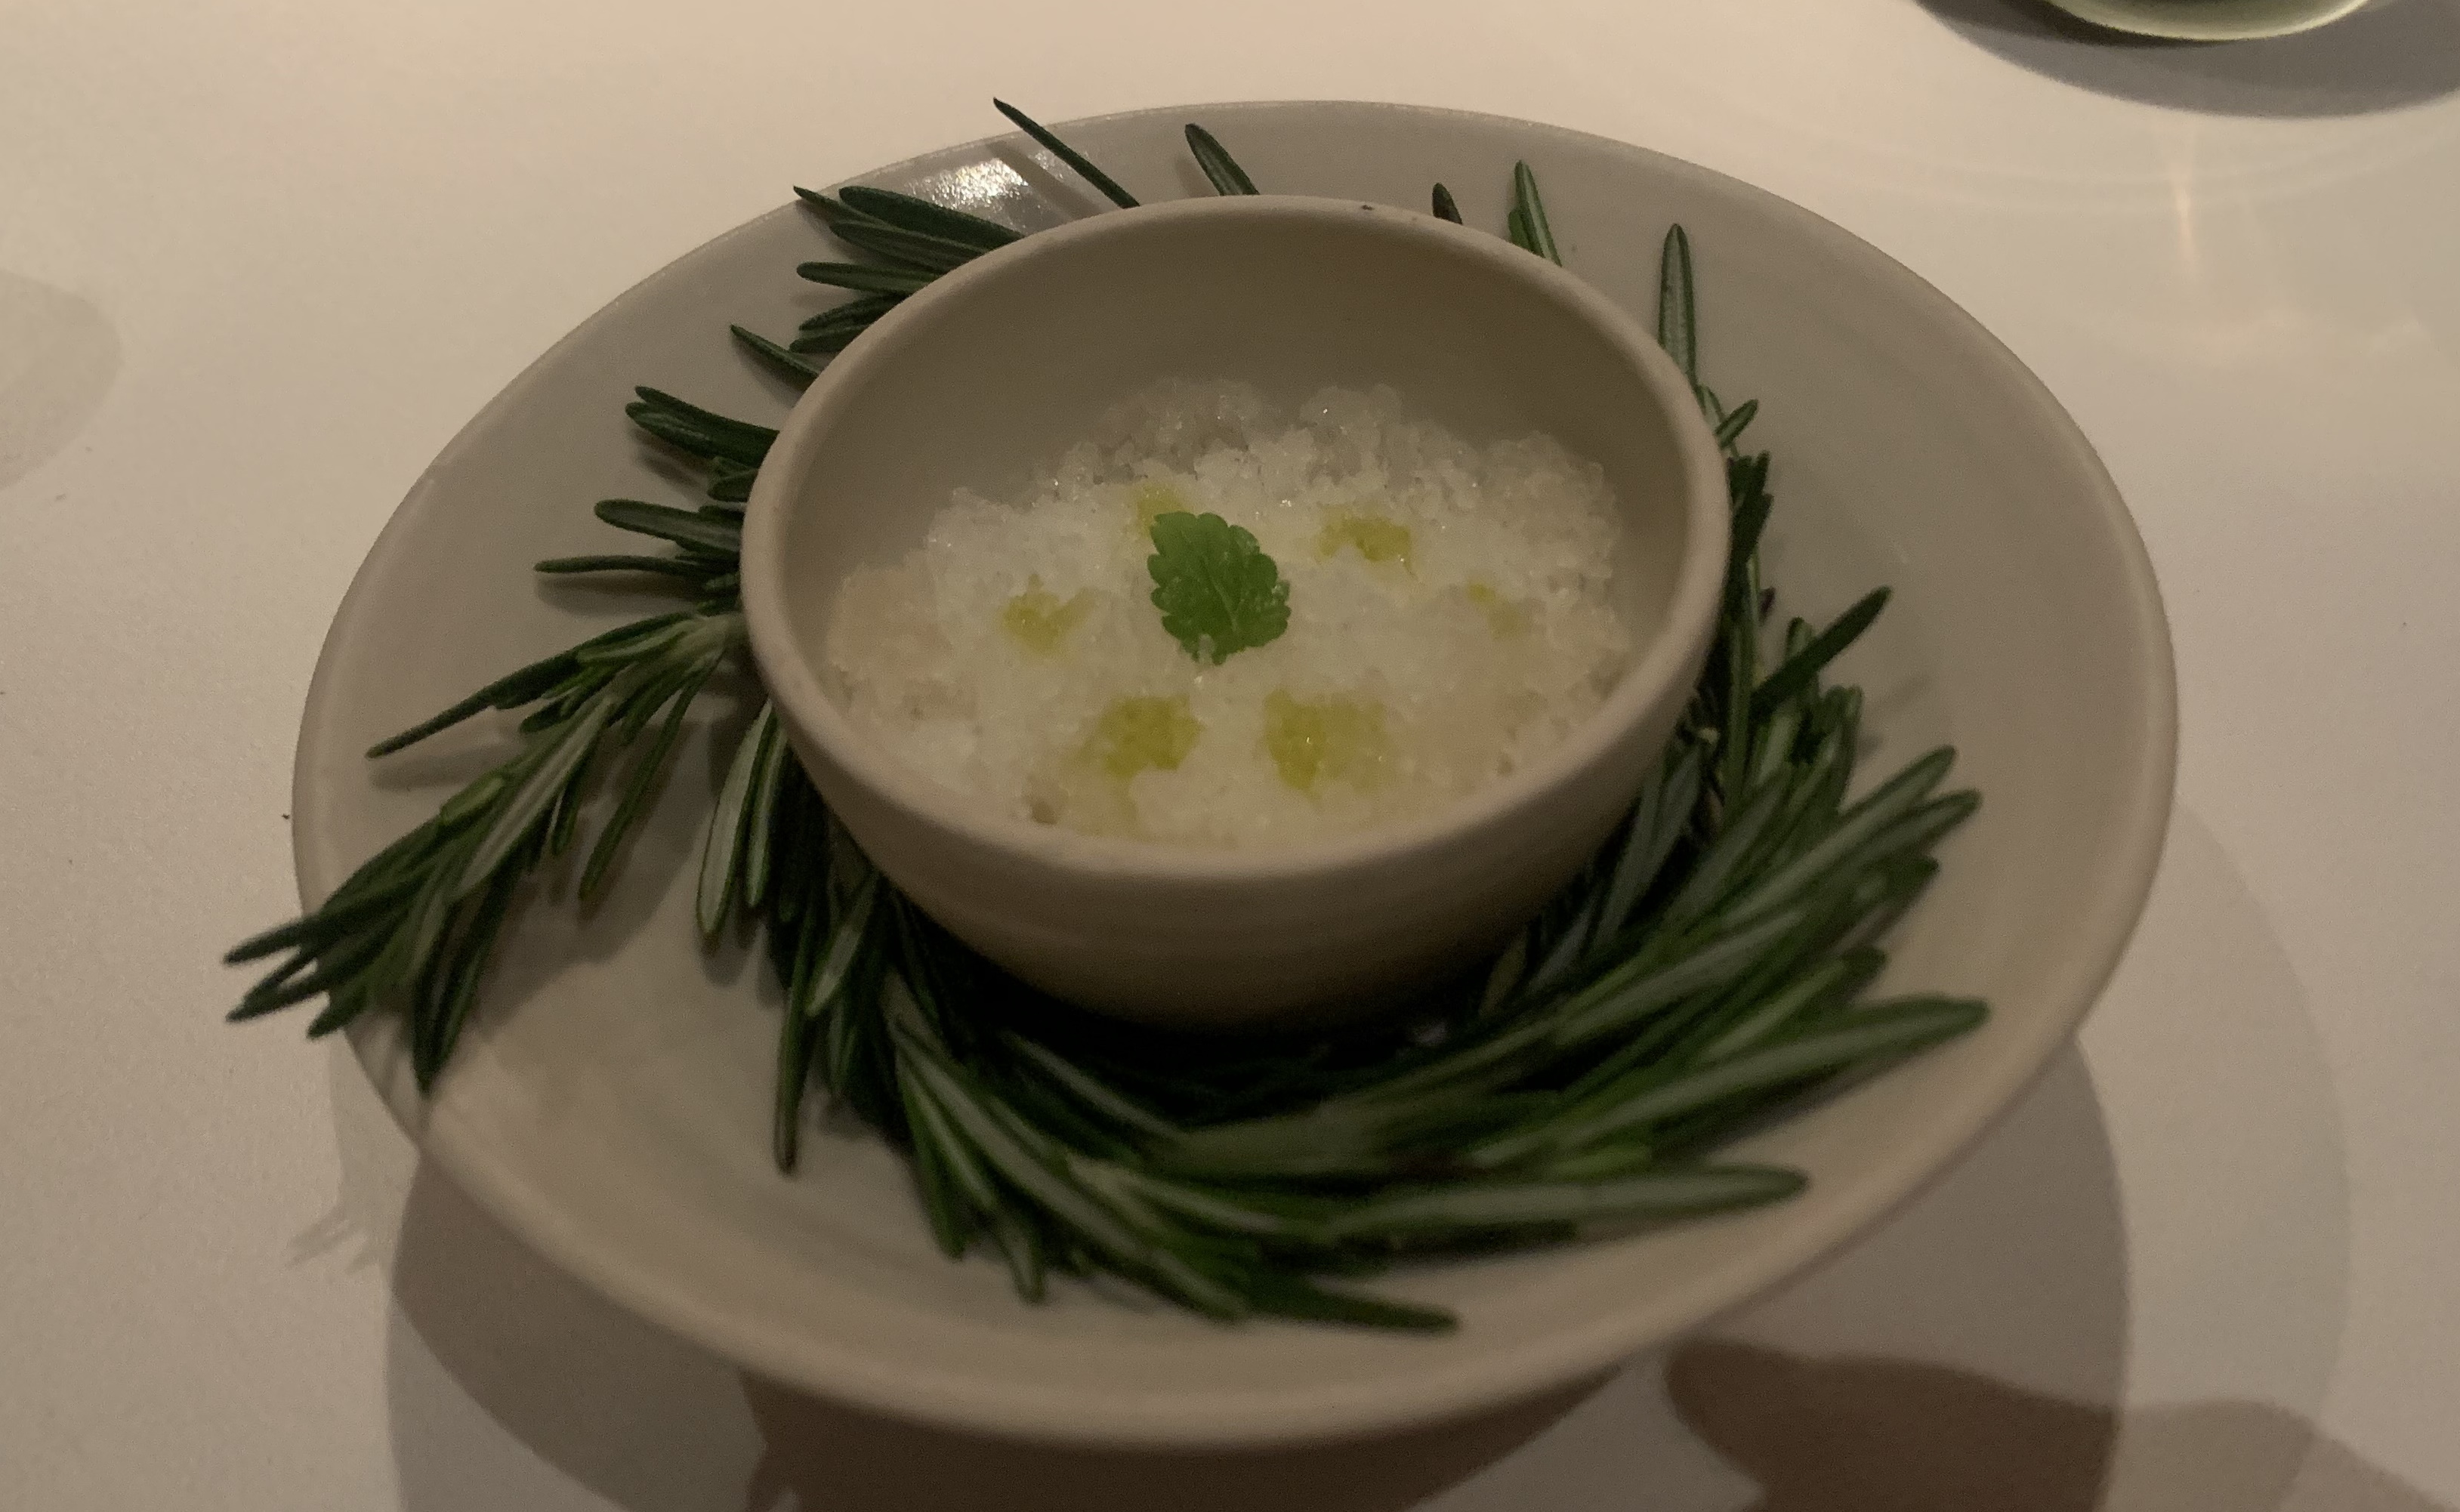 Saucer with a bowl of shaved ice on top of it. The bowl of shaved ice is embraced by sprigs of rosemary wound around it like a nest. The shaved ice itself is clear ice with a few dollops of yellow, and one single mint leaf in the middle.